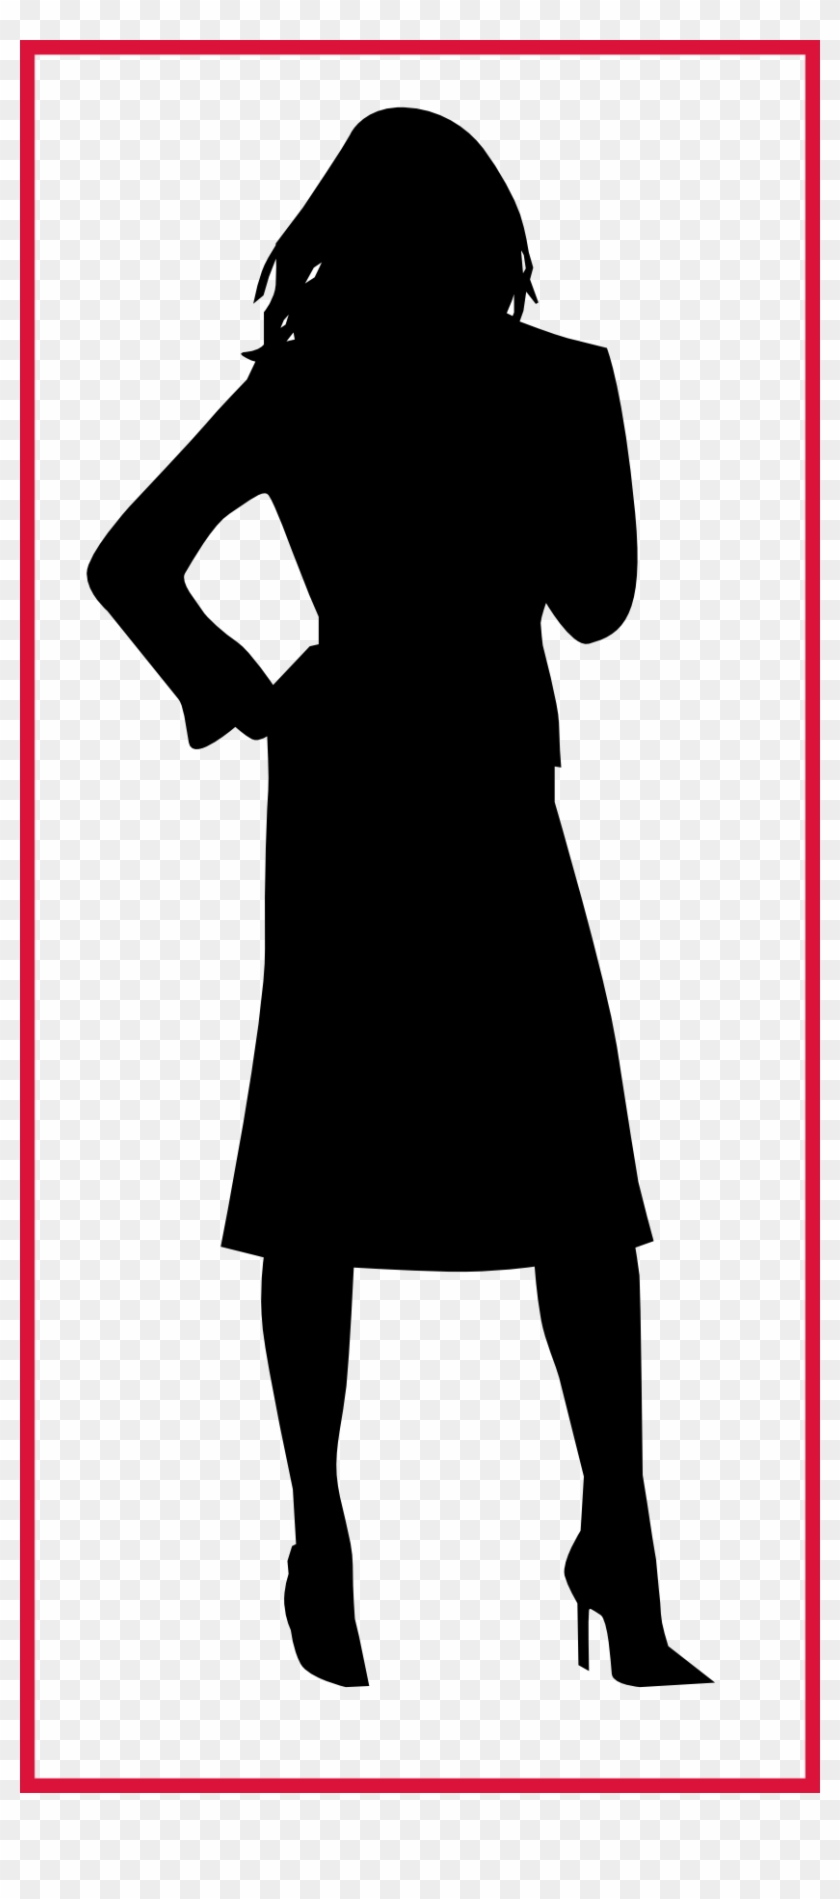 Incredible Silhouette Woman Zoeken Crafts Pics Of Women - Woman Silhouette Png Transparent #868049